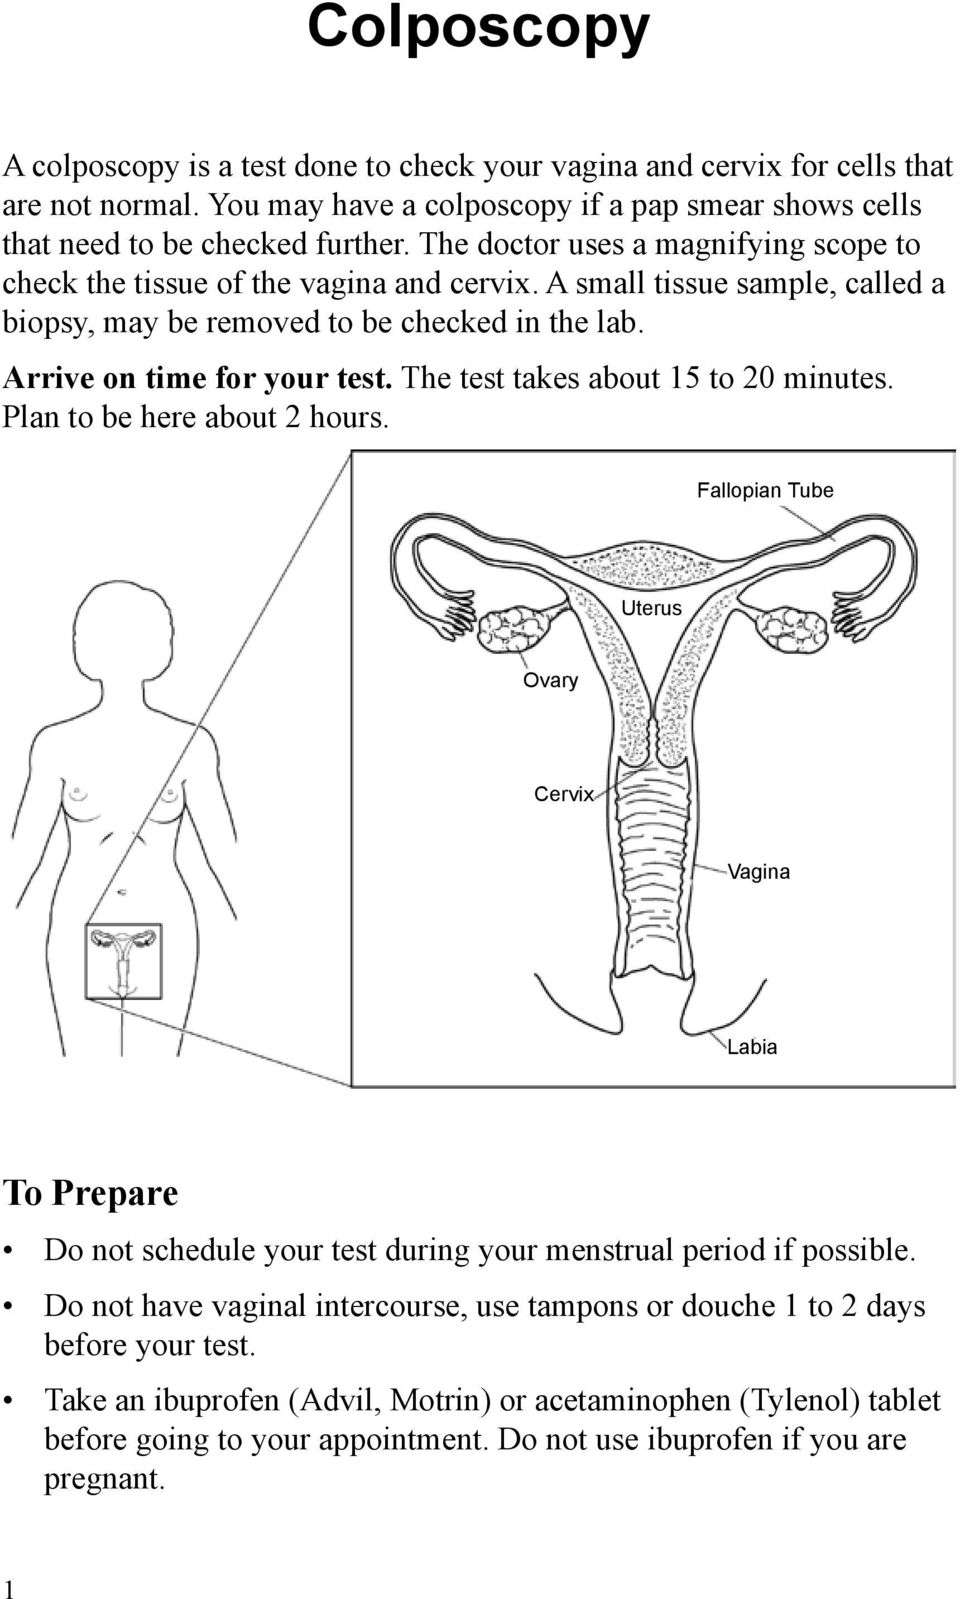 The test takes about 15 to 20 minutes. Plan to be here about 2 hours. Fallopian Tube Uterus Ovary Cervix Vagina Labia To Prepare Do not schedule your test during your menstrual period if possible.